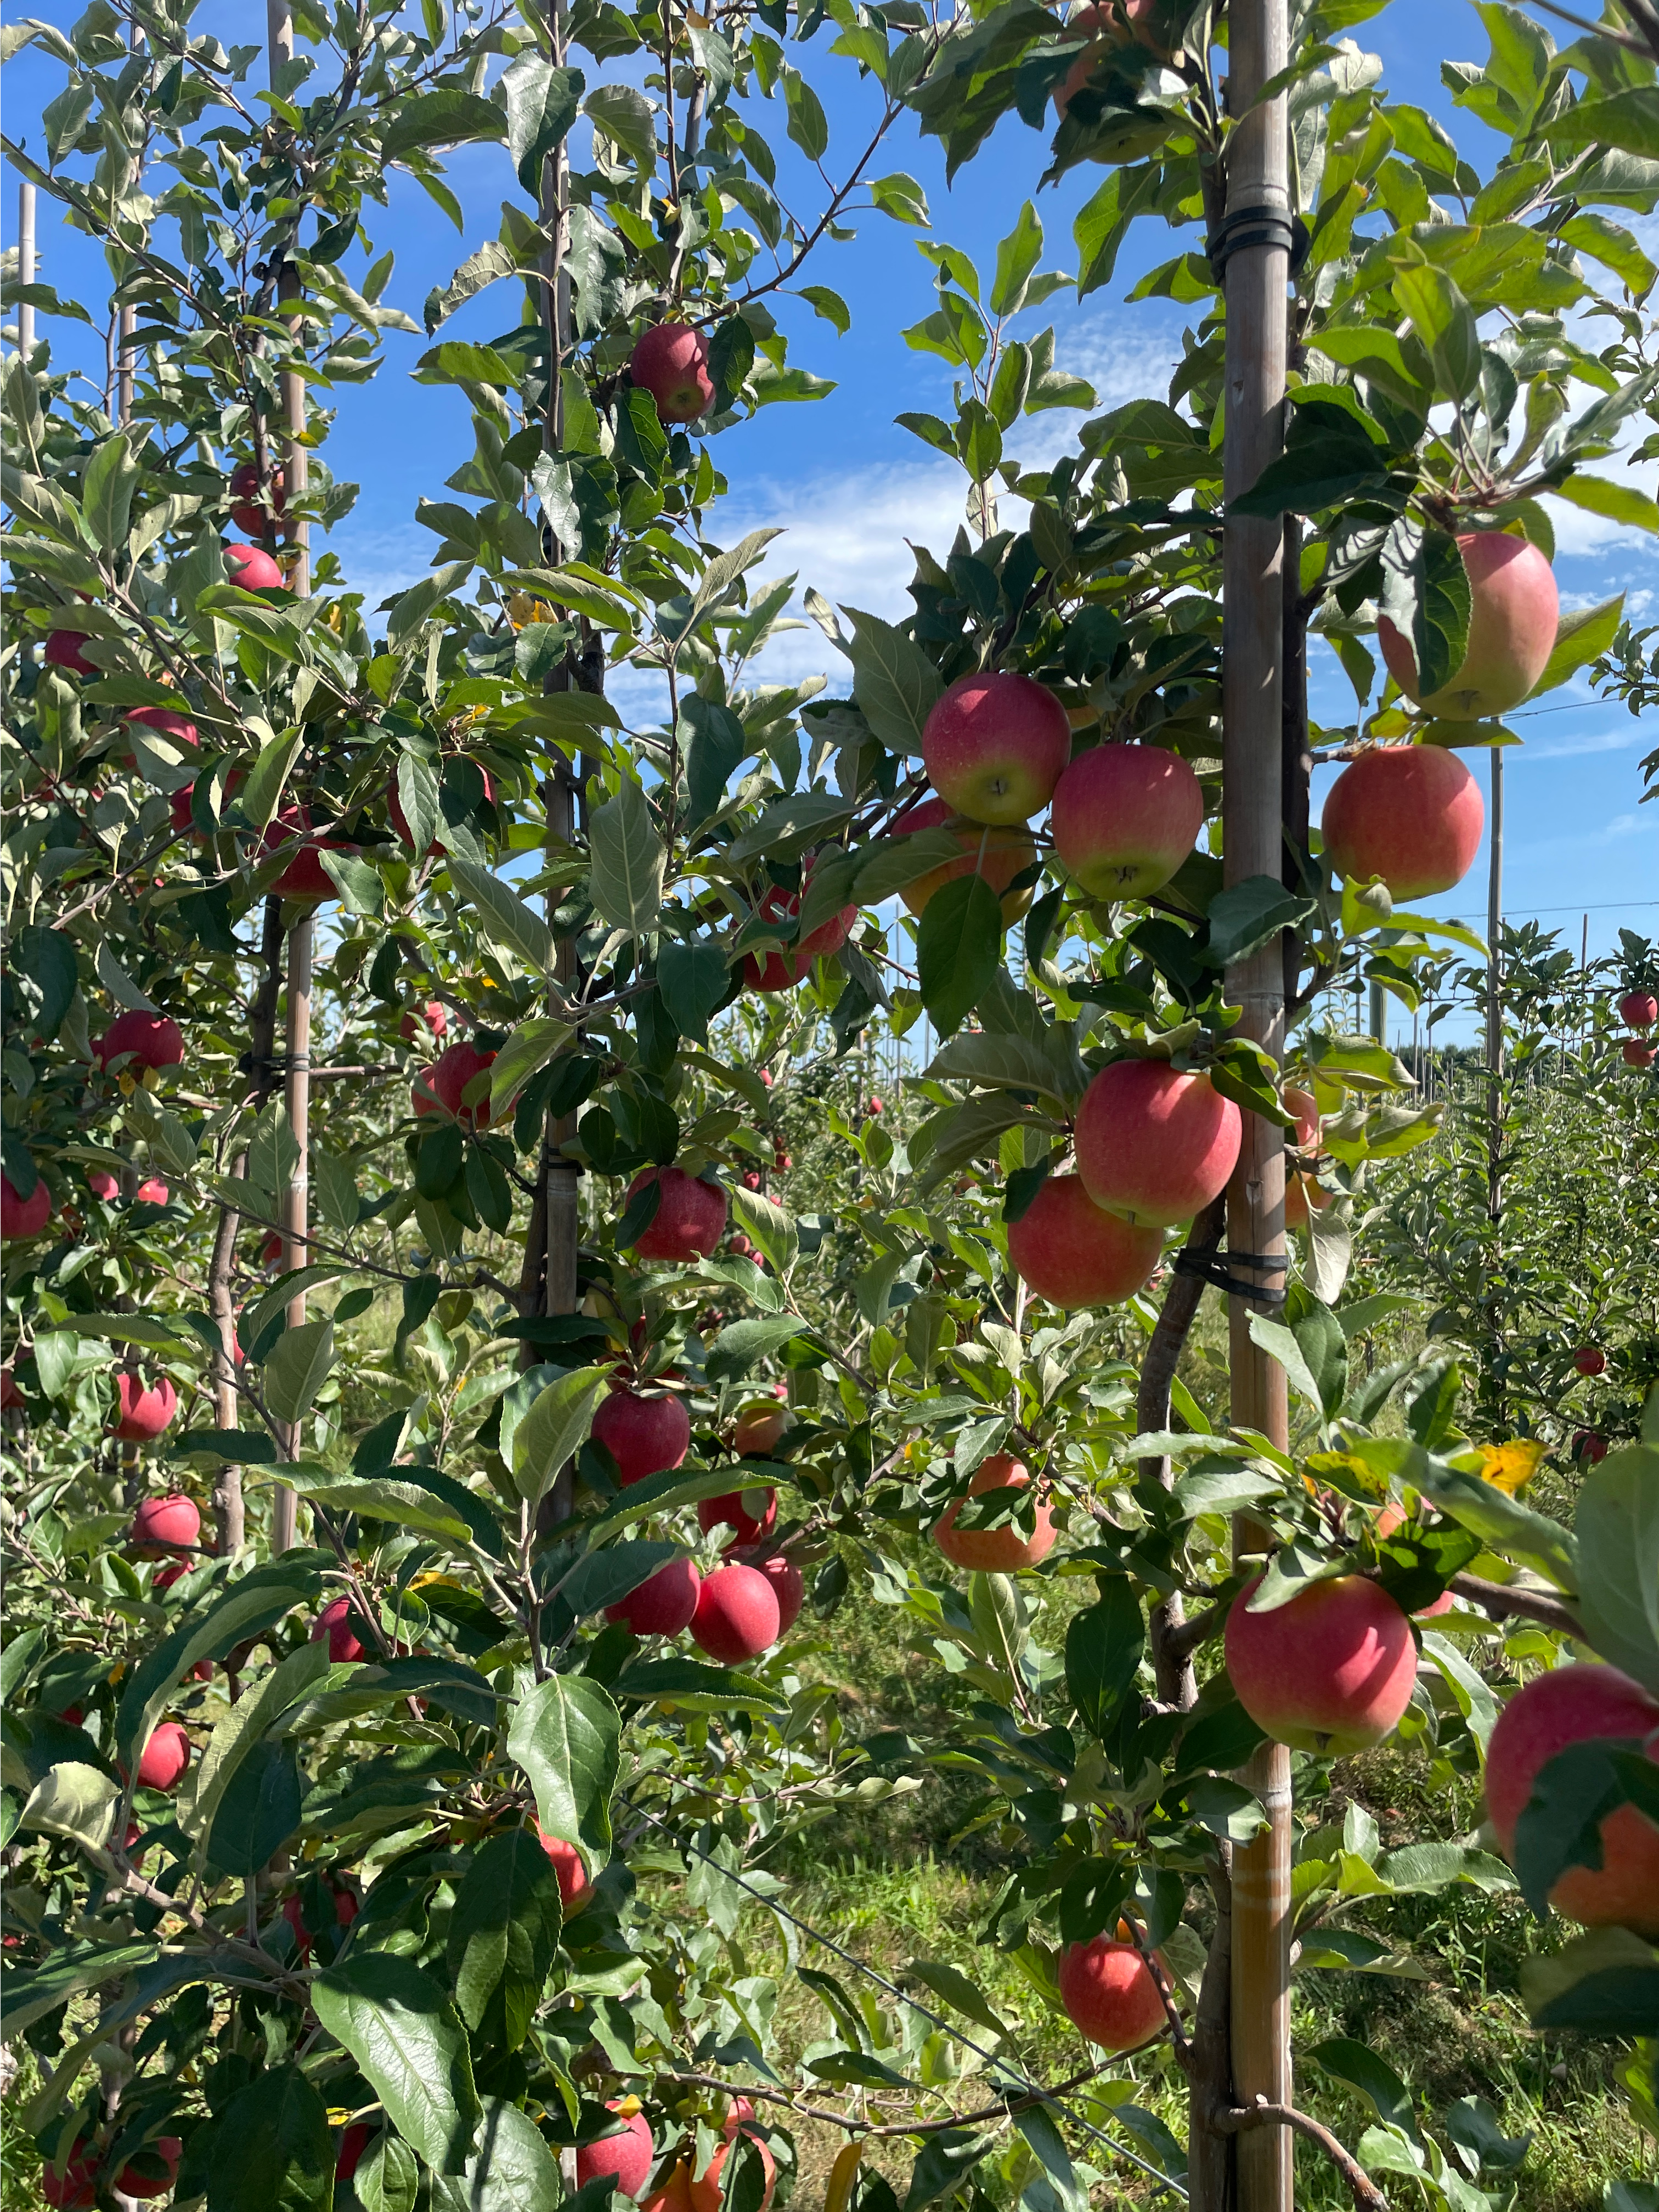 Gala apples ready for harvest.